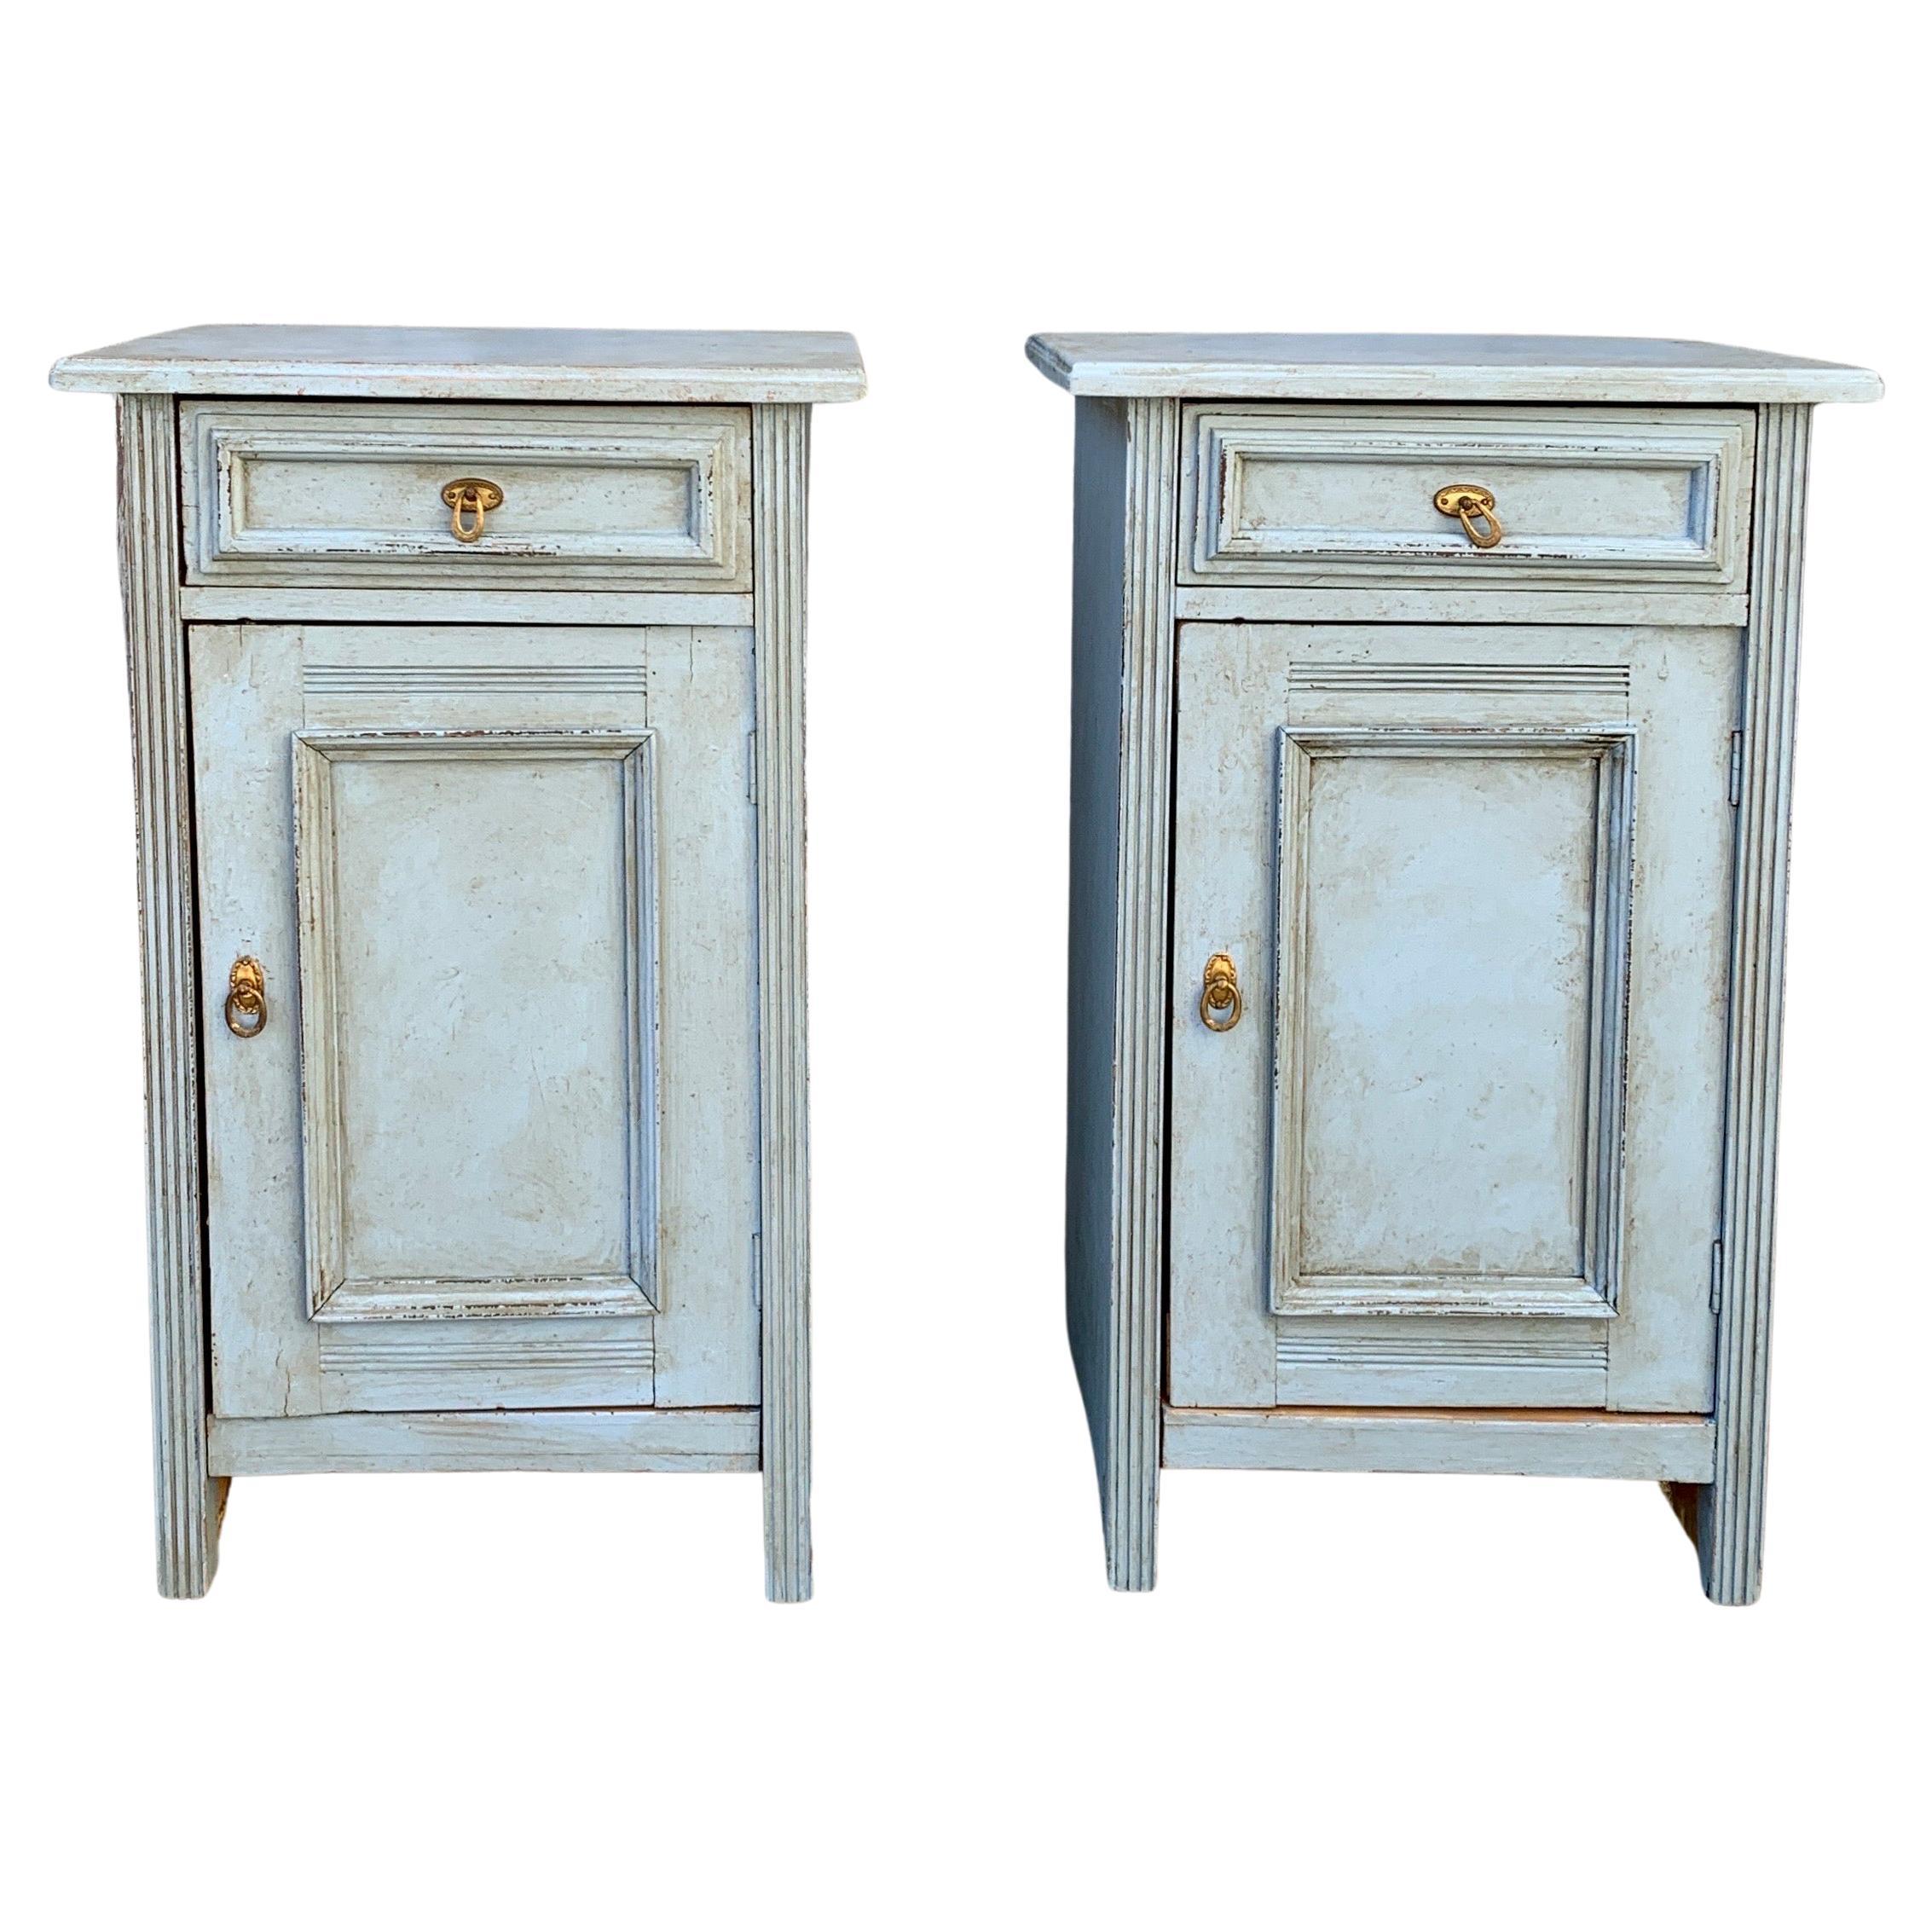 A pair of Gustavian blue painted Swedish nightstands or night tables from the second half of the 19th Century in painted pine wood. These folk art Gustavian style pieces with a charming patina have one clean working drawer to open and one door with